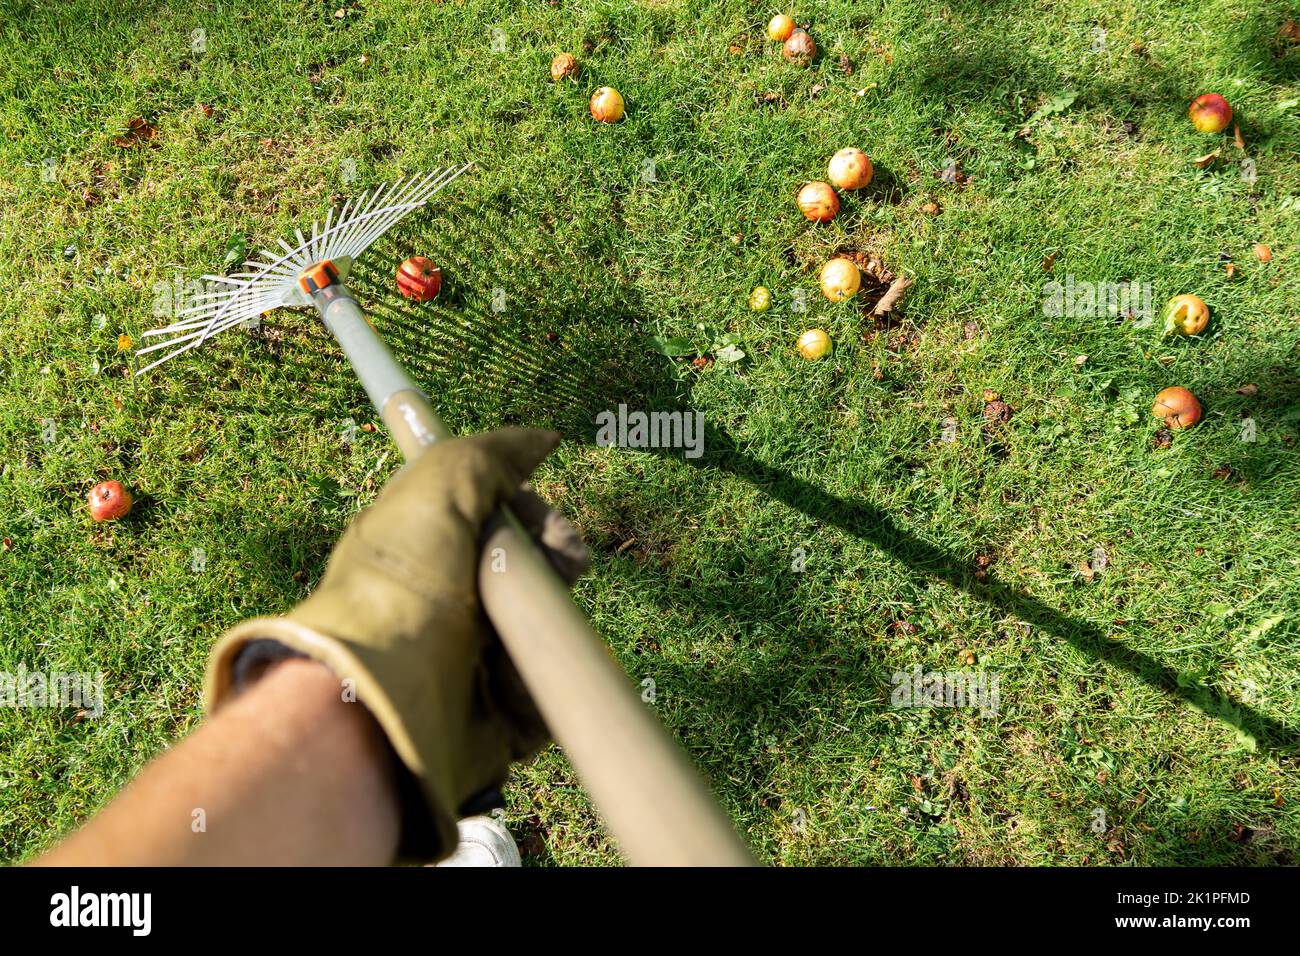 Harvesting fallen apples with a leaf rake Stock Photo